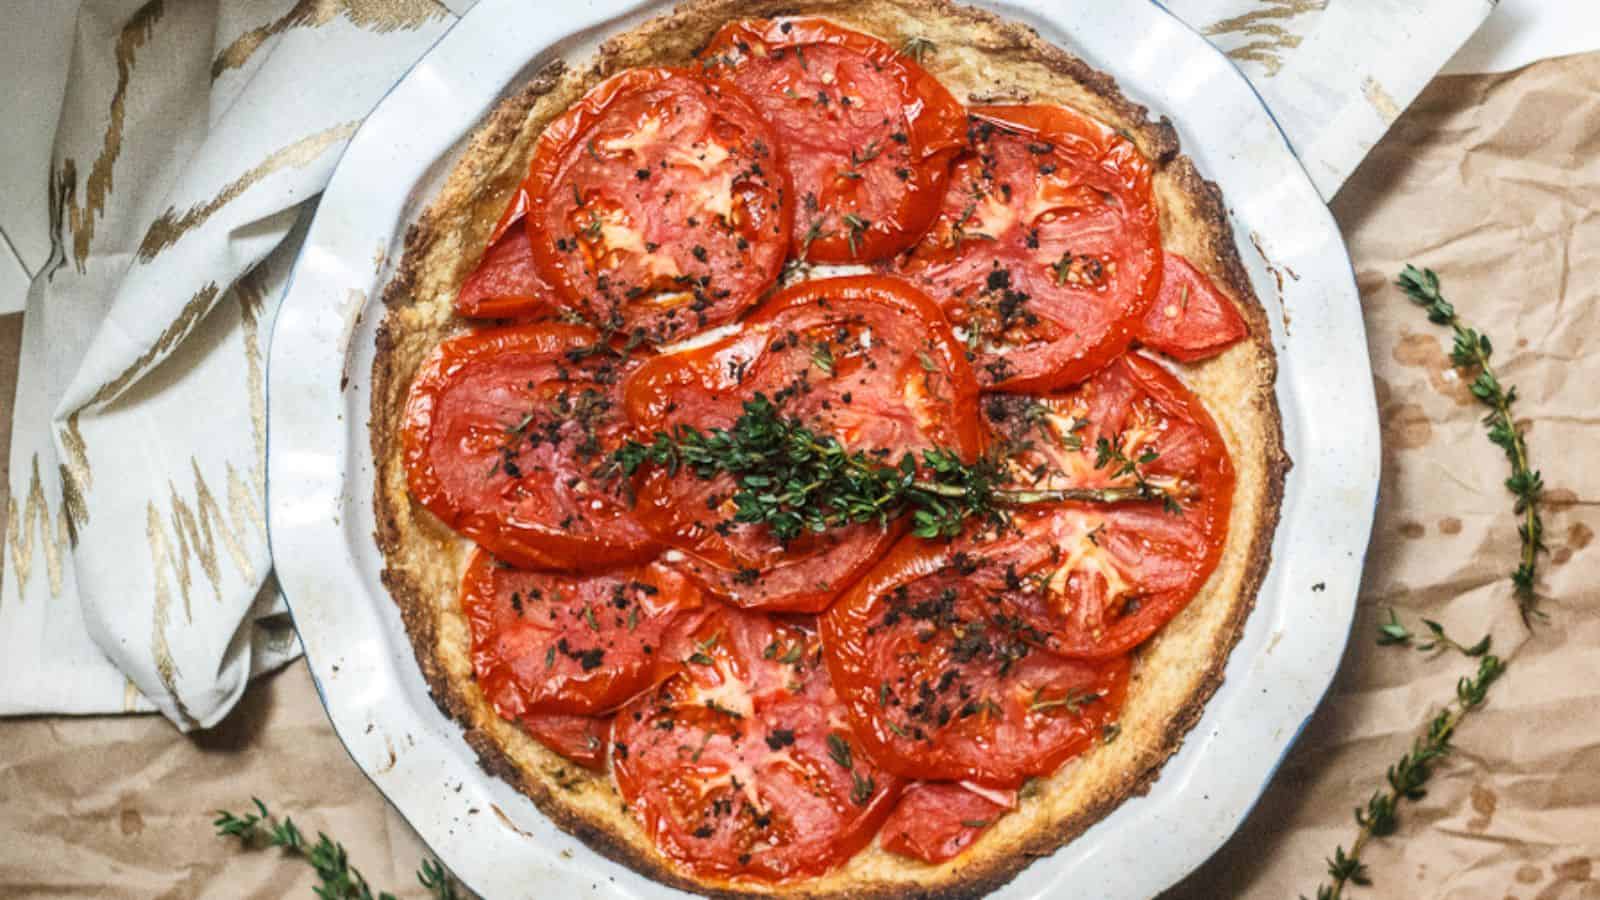 A pie with tomatoes and thyme on top.